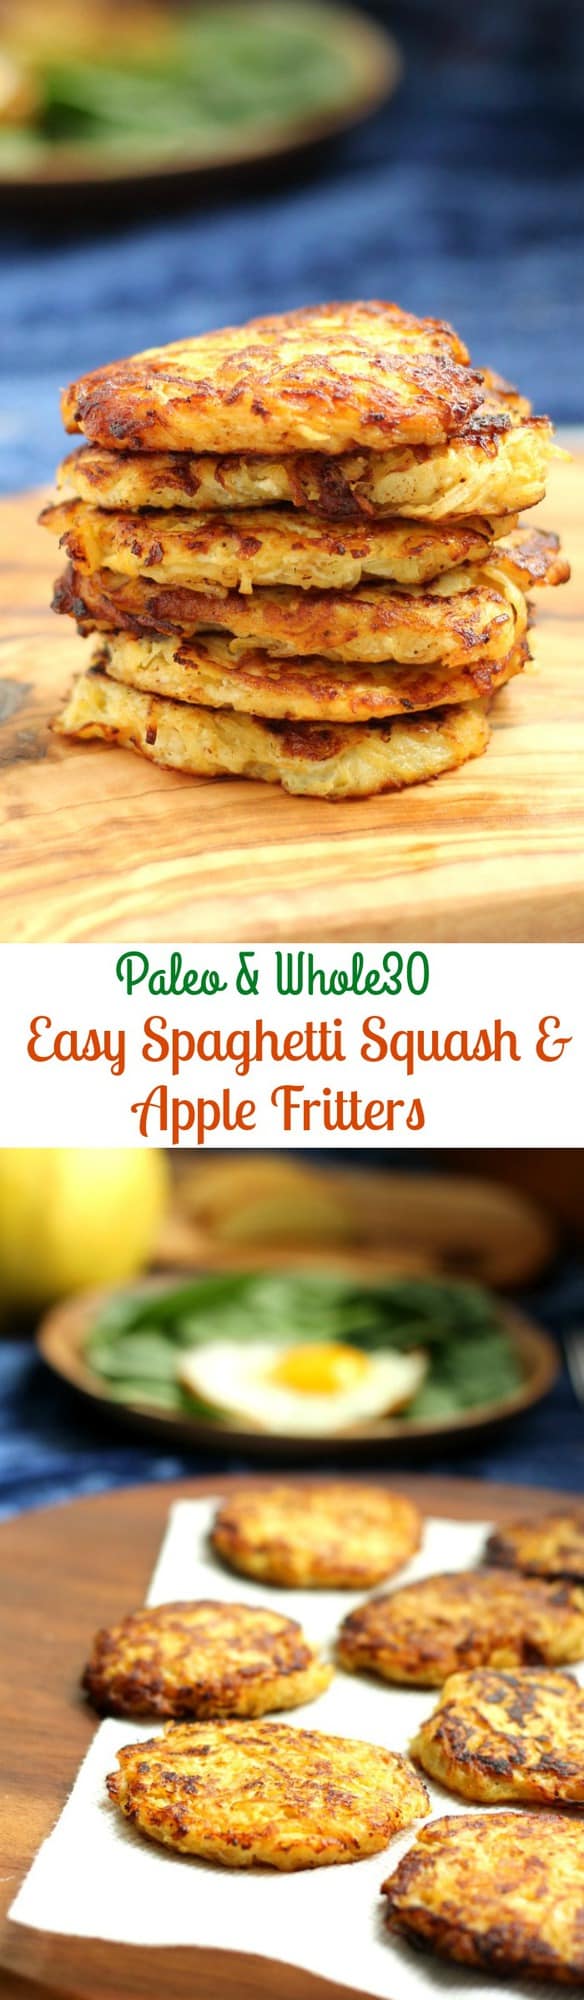 Spaghetti squash and apple fritters that are Paleo and Whole30 friendly, grain free and couldn't be easier!